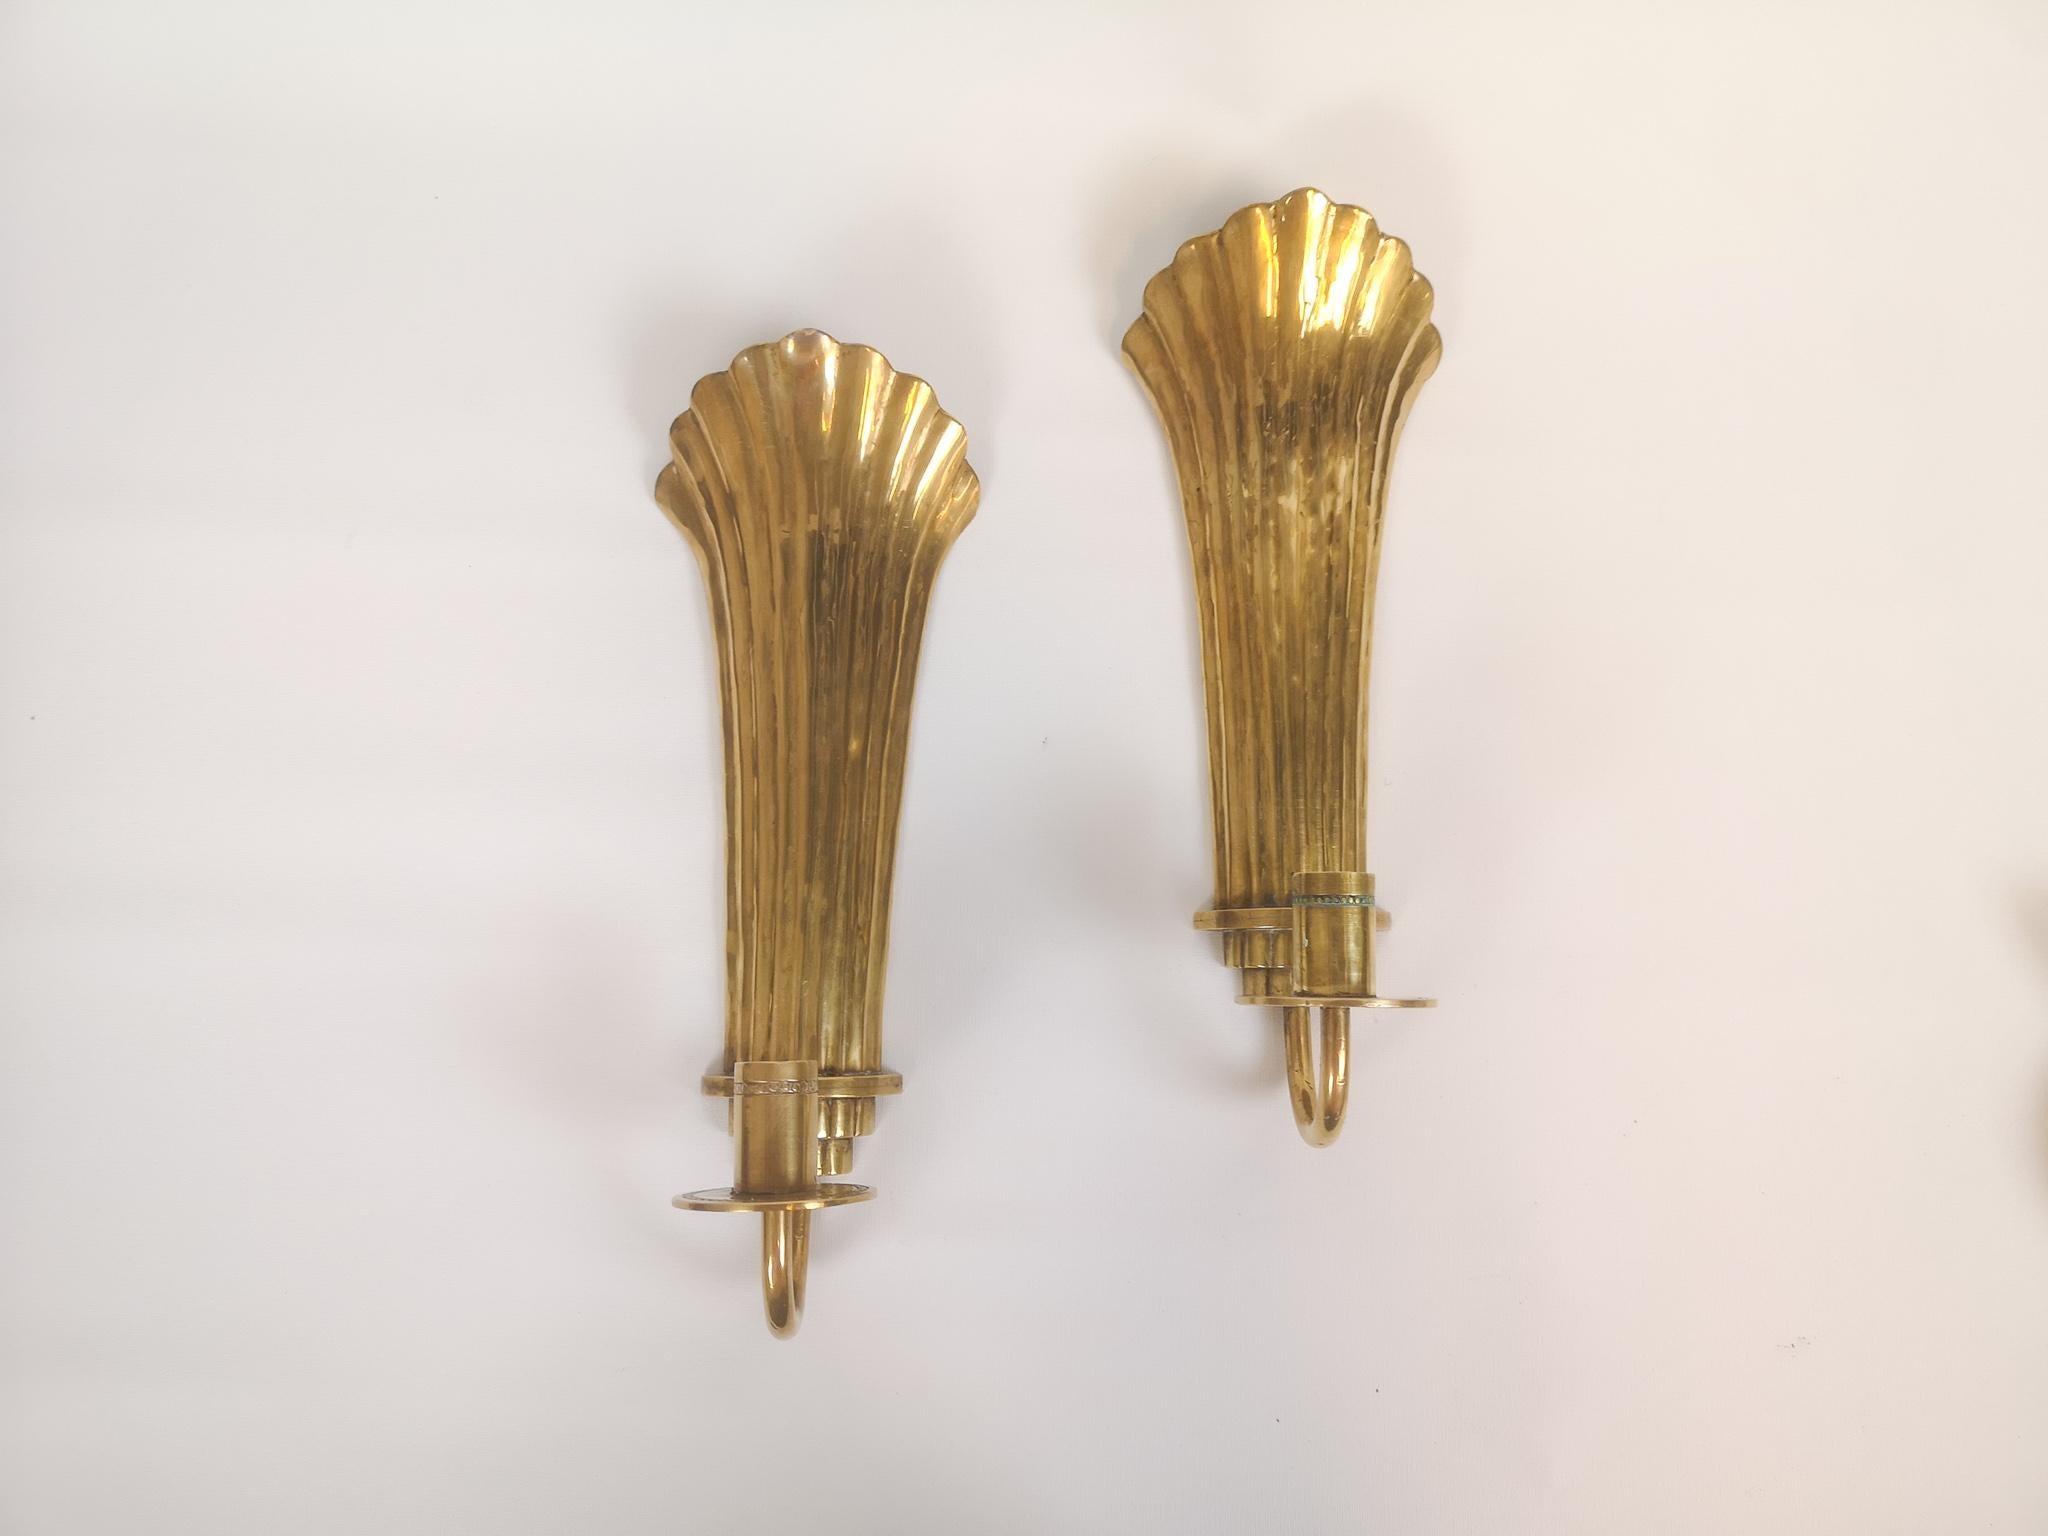 These wall candlesticks was hand-sculpted in Arvika, Sweden. The candlesticks are made in brass by famous Holmström Arvika, these ones are signed on the back.

Gives a nice shine when a candle is lit.

Good condition.

Measures: H 28 cm, W 14